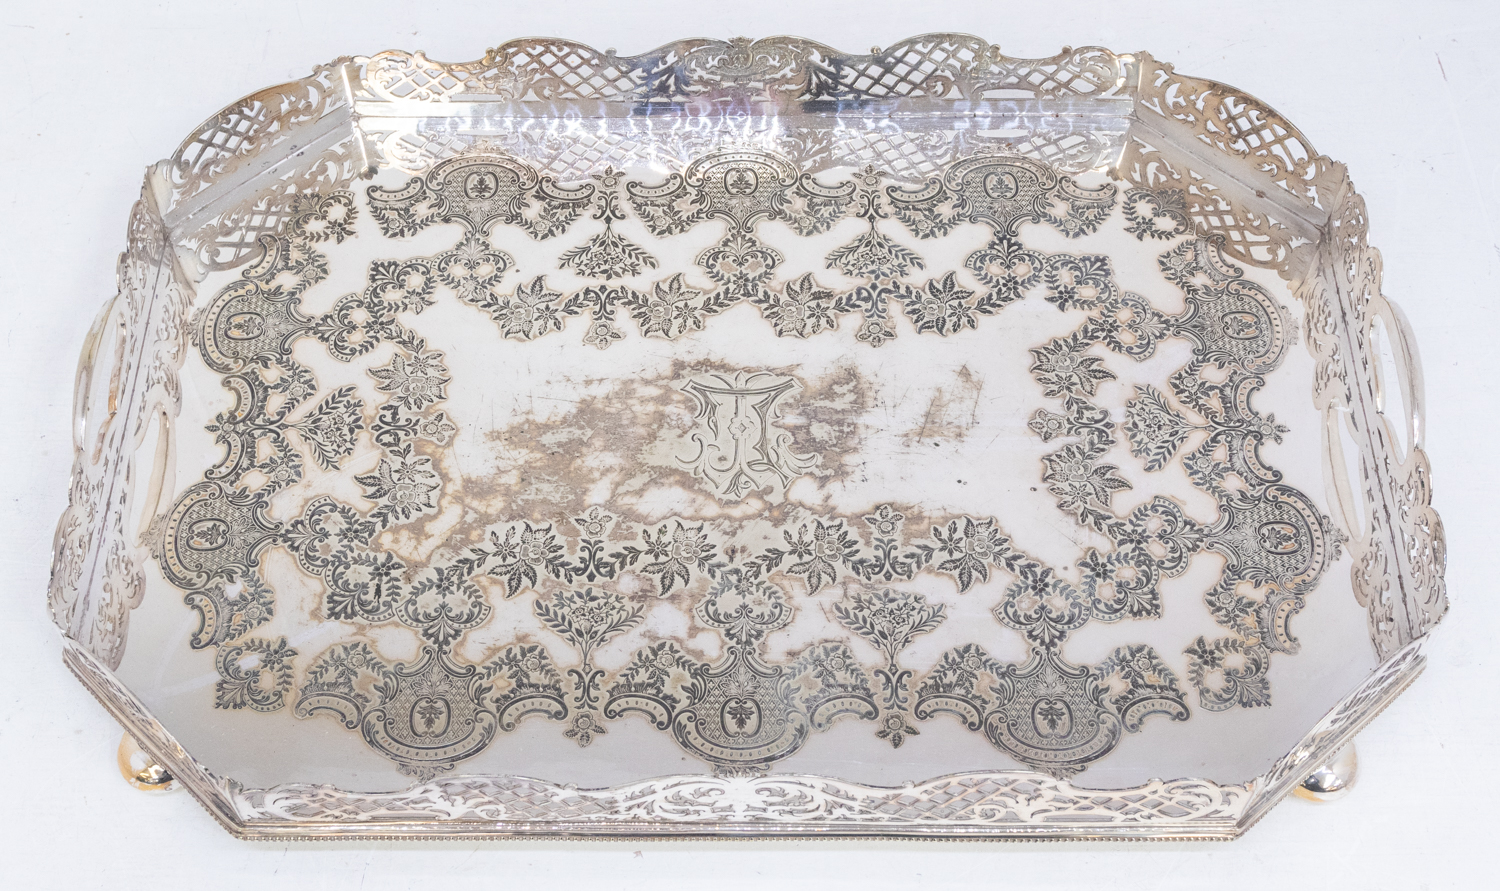 A large late 19th century/early 20th century silver plated serving tray with gallery surround and